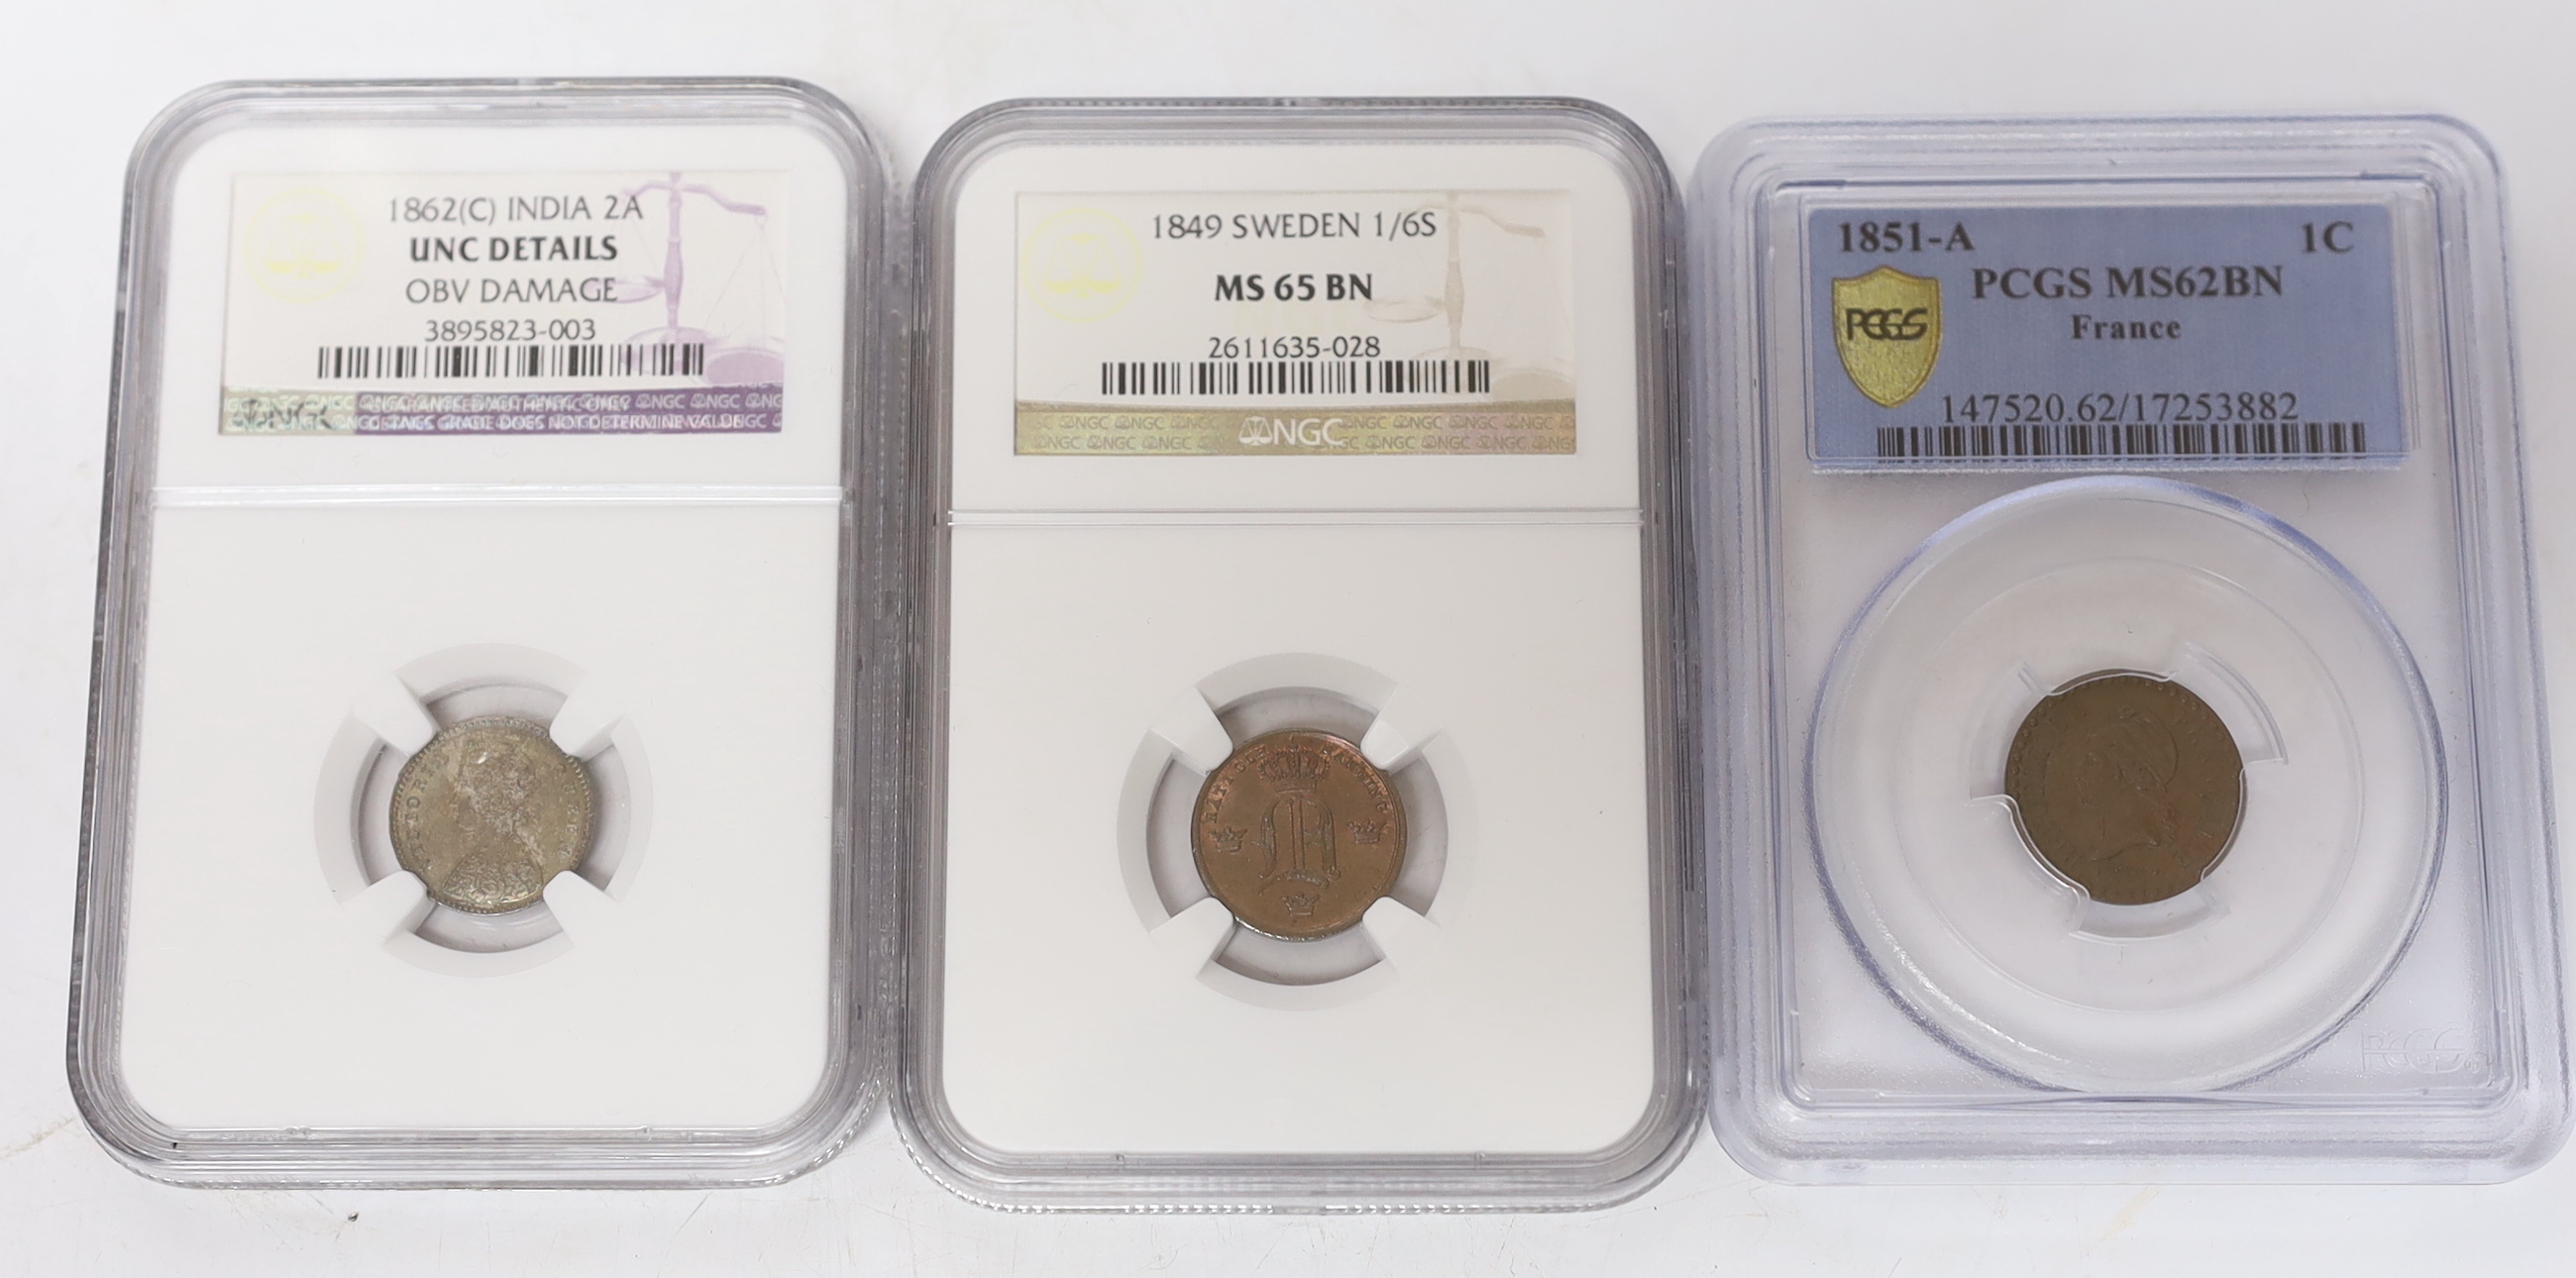 Russia One rouble 1893, ANACS graded VF 35, British India 2 Annas 1862 (C), NGC graded UNC, damage to obverse, Guatemala quarter real, 1819 G, NGC graded MS 65 (the highest graded example by NGC), Sweden 1/6 skilling 184